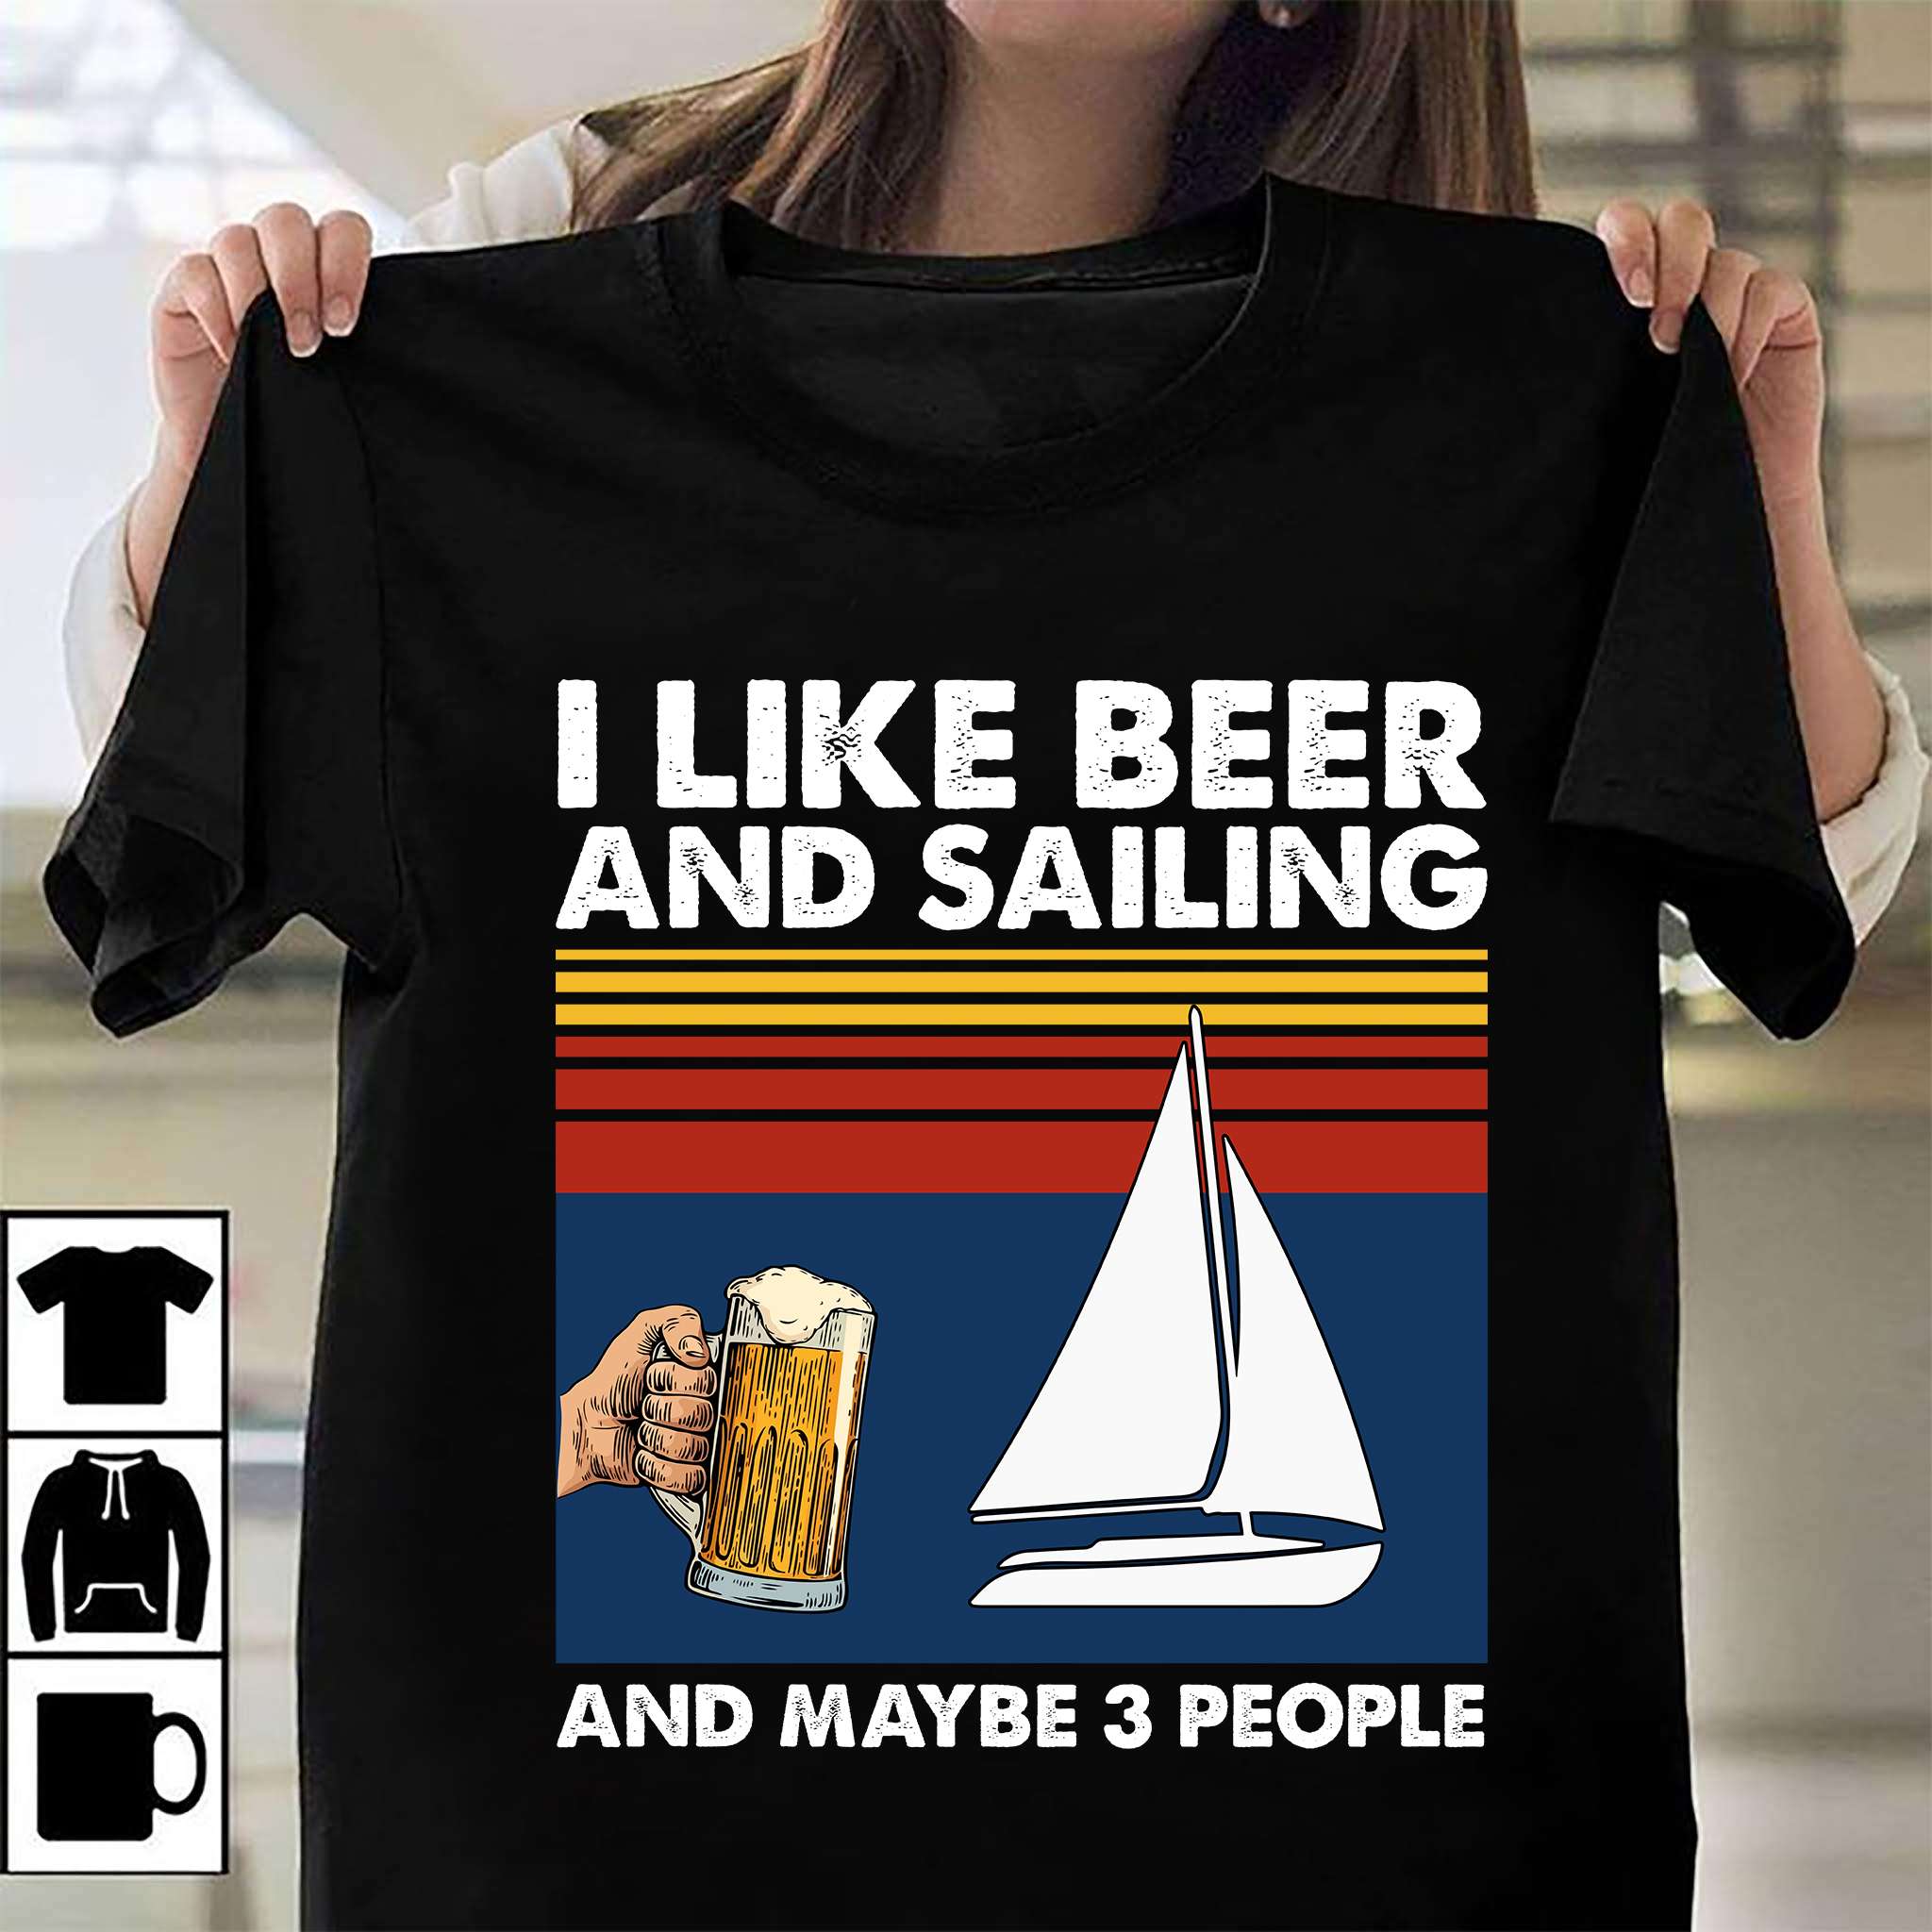 I like beer and sailing and maybe 3 people - Love to go sailing, drinkin and sailing